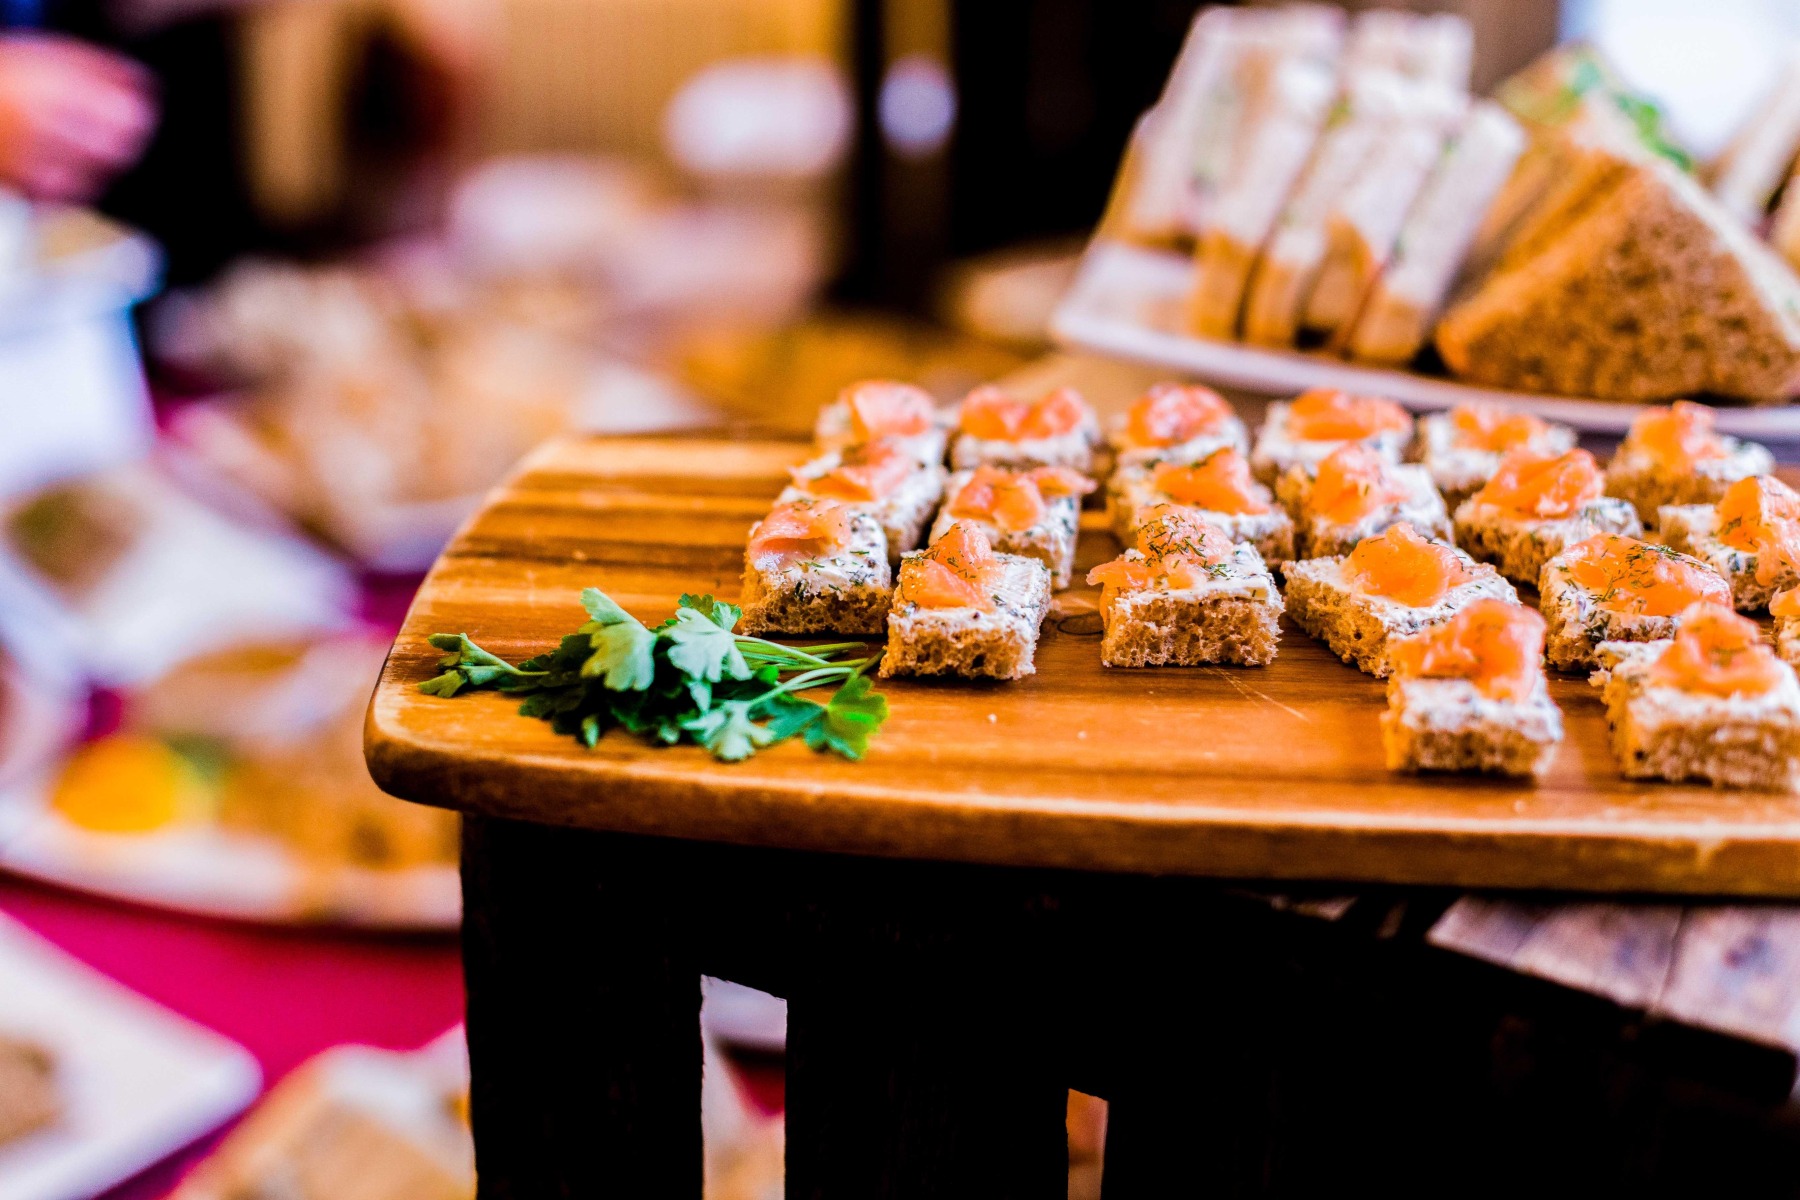 A close up of salmon canapes on a wooden table